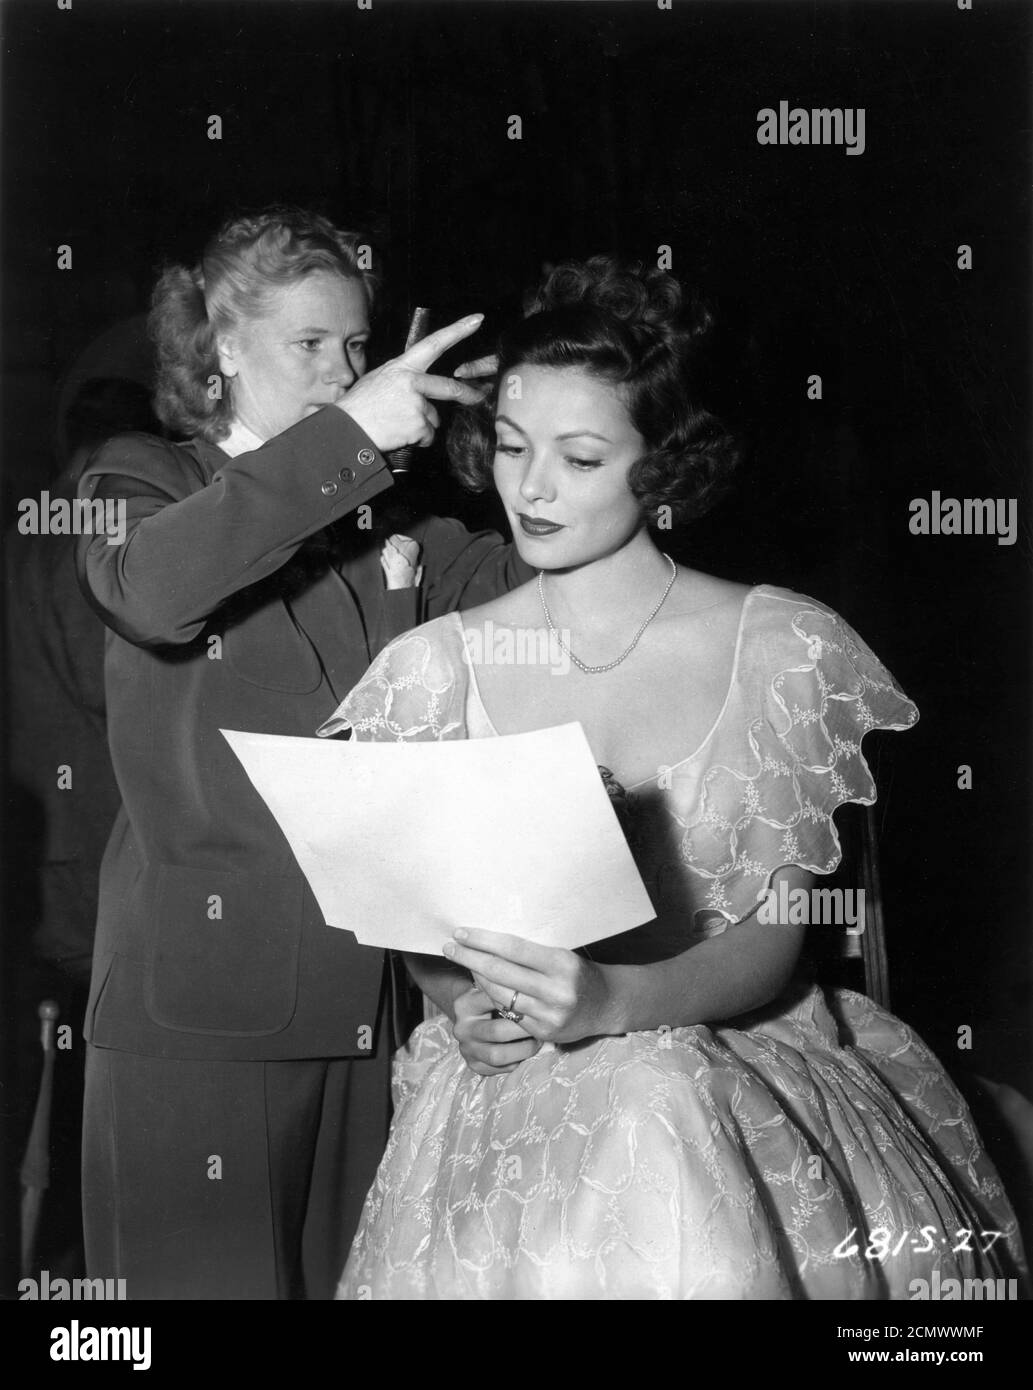 A hairdresser adjusts GENE TIERNEY 's hair while she looks over a diagram of the action for her next scene in THE RAZOR'S EDGE 1946 director EDMUND GOULDING novel W. Somerset Maugham screenplay Lamar Trotti  music Alfred Newman producer Darryl F. Zanuck Twentieth Century Fox Stock Photo